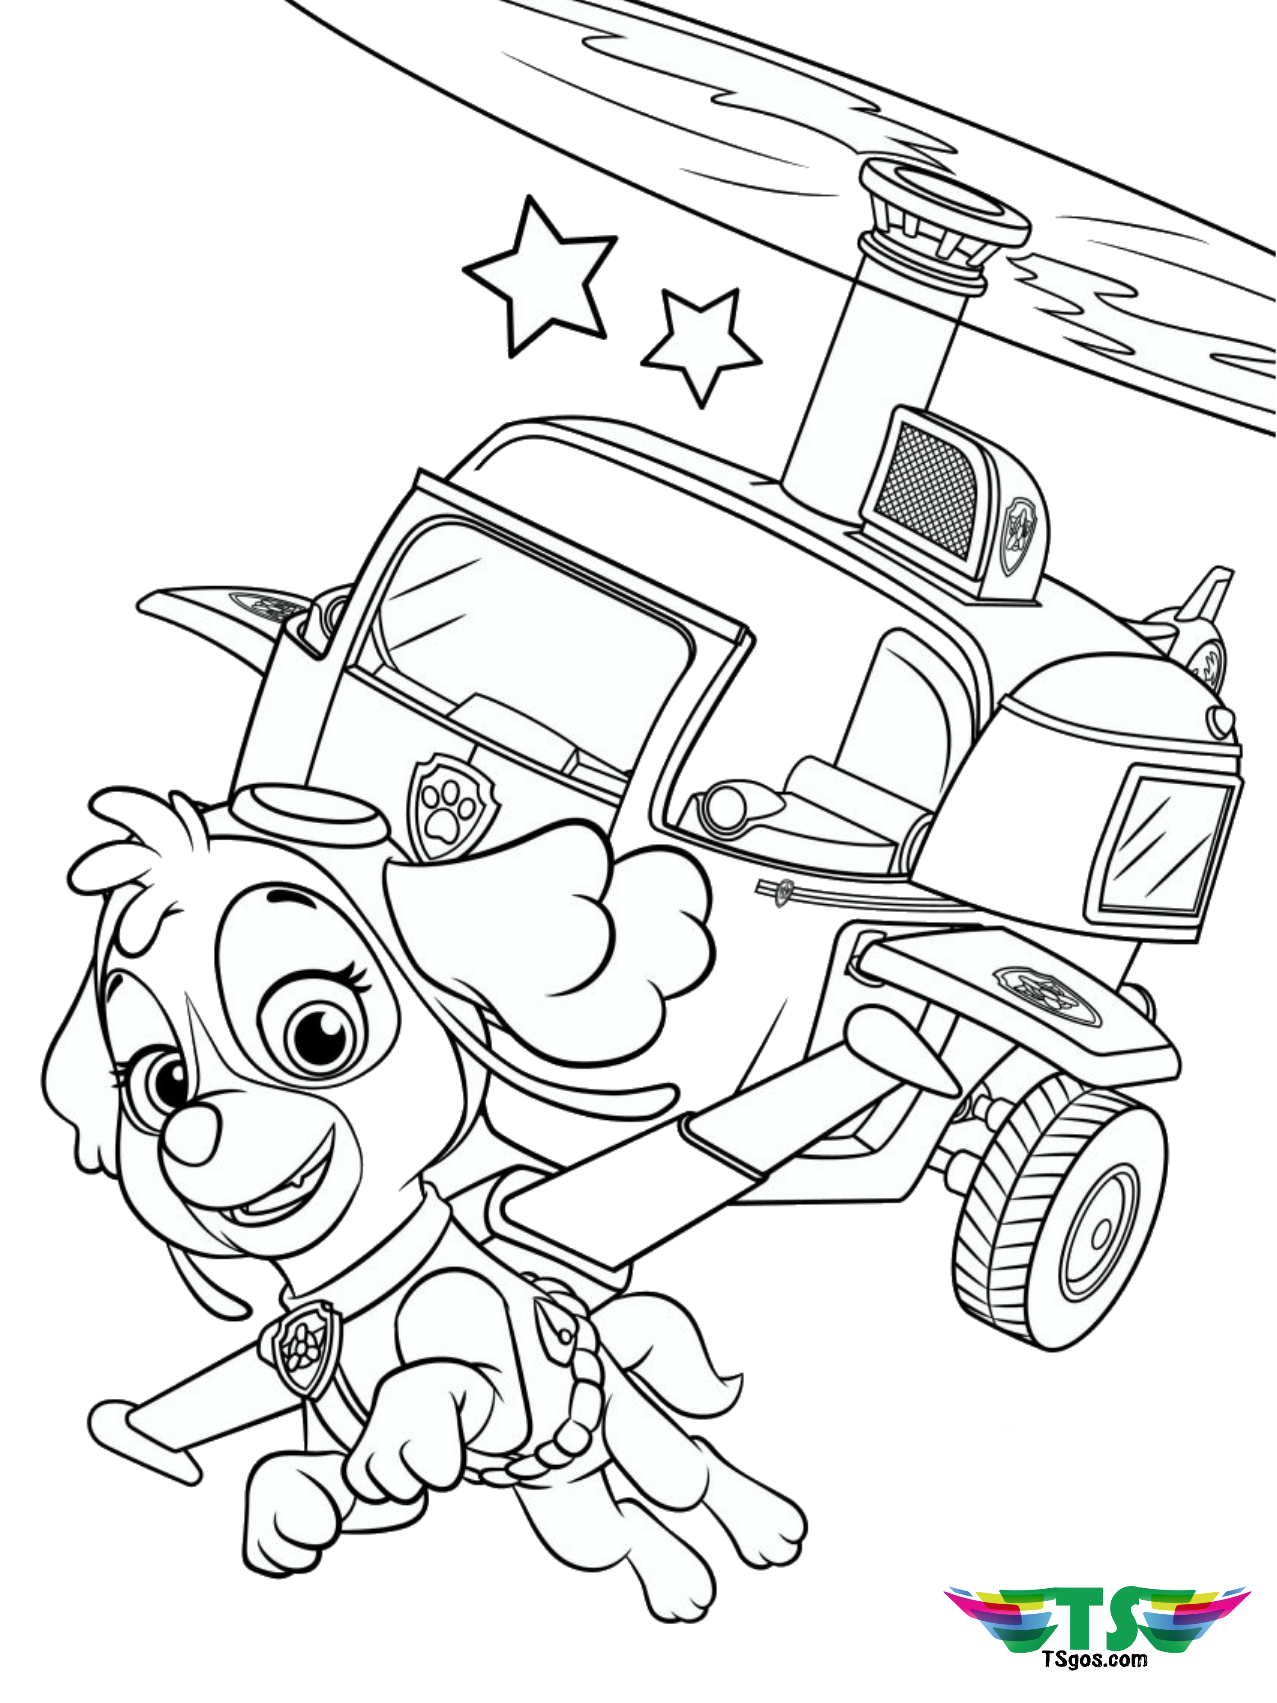 Printable Paw Patrol Vehicles Coloring Pages Paw Patrol Skyes Images